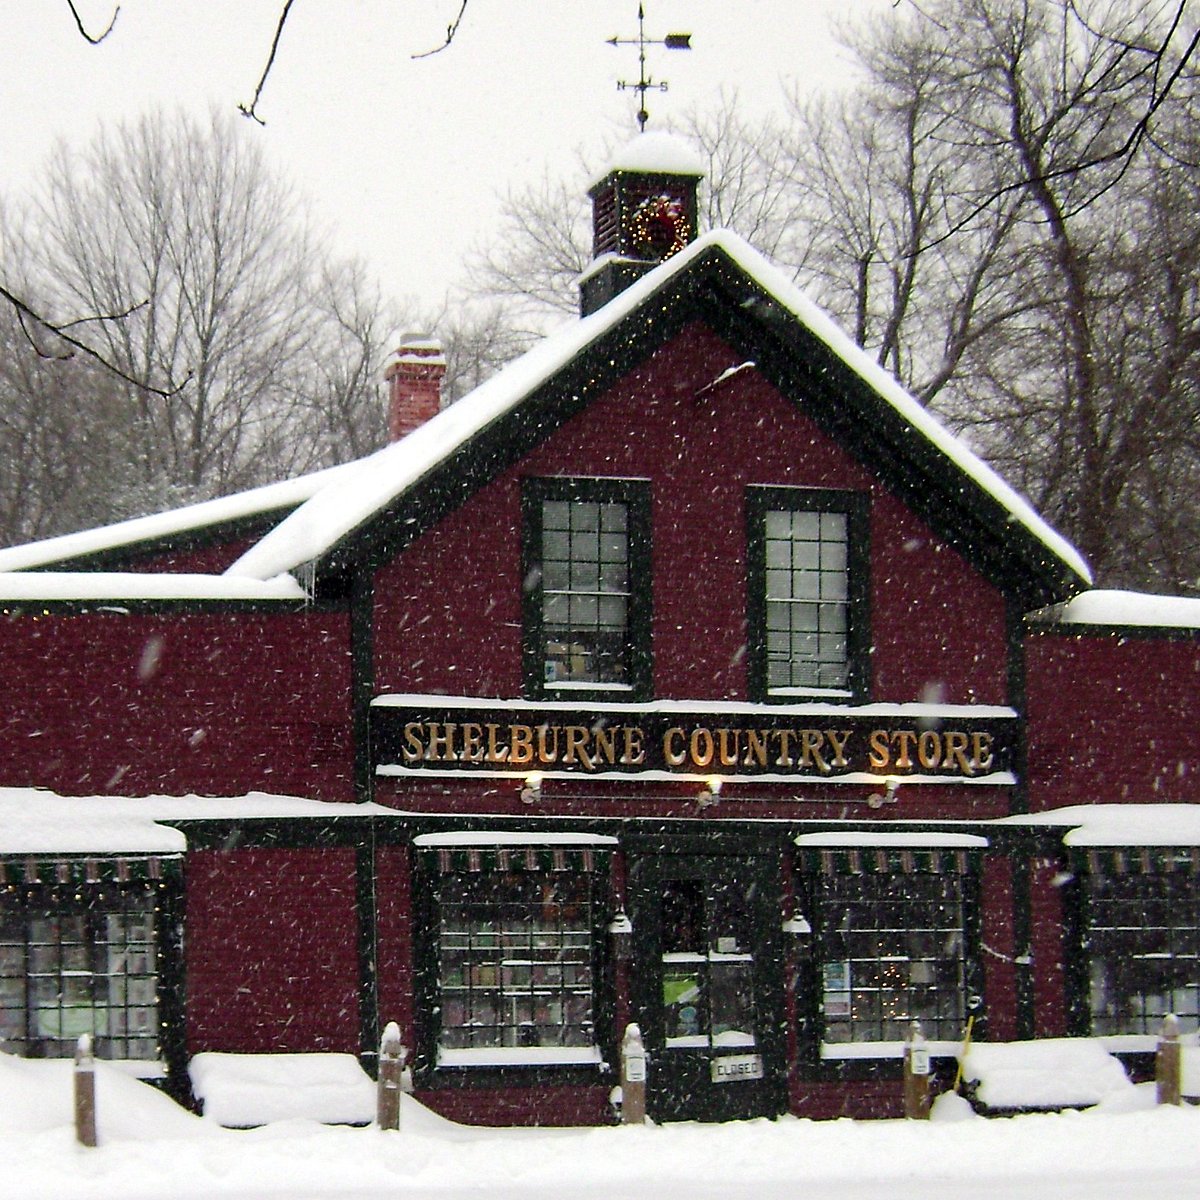 The Vermont Country Store, Christmas in New England